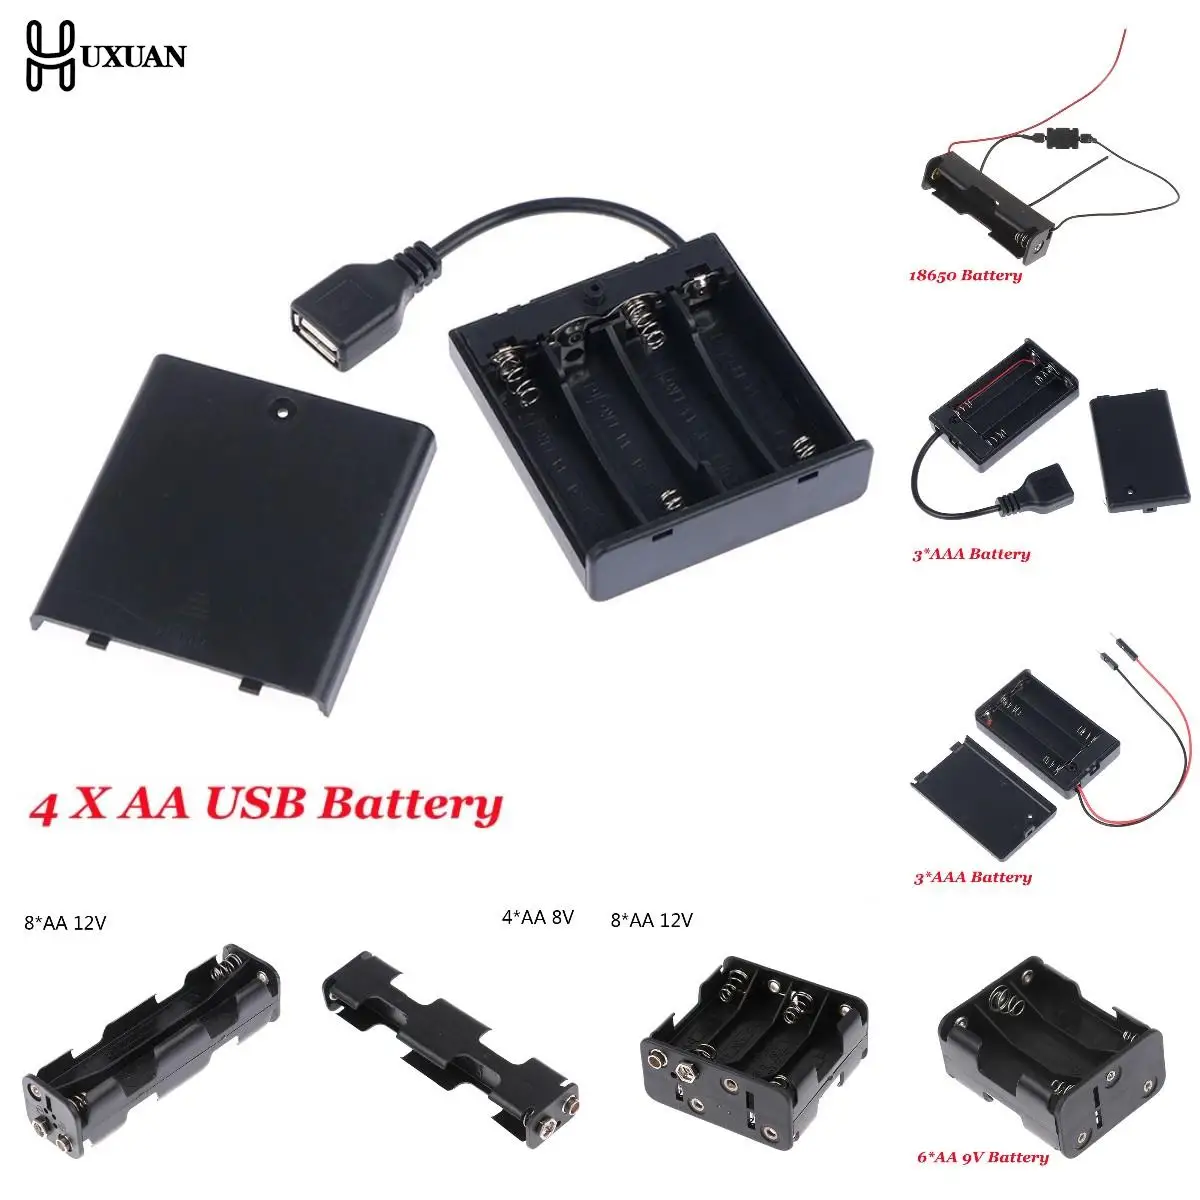 

DIY 4/6/8 AA Battery Case Box ABS 18650 Power Bank Cases Holder Storage Case With Lead Wire Bateria Protection Container